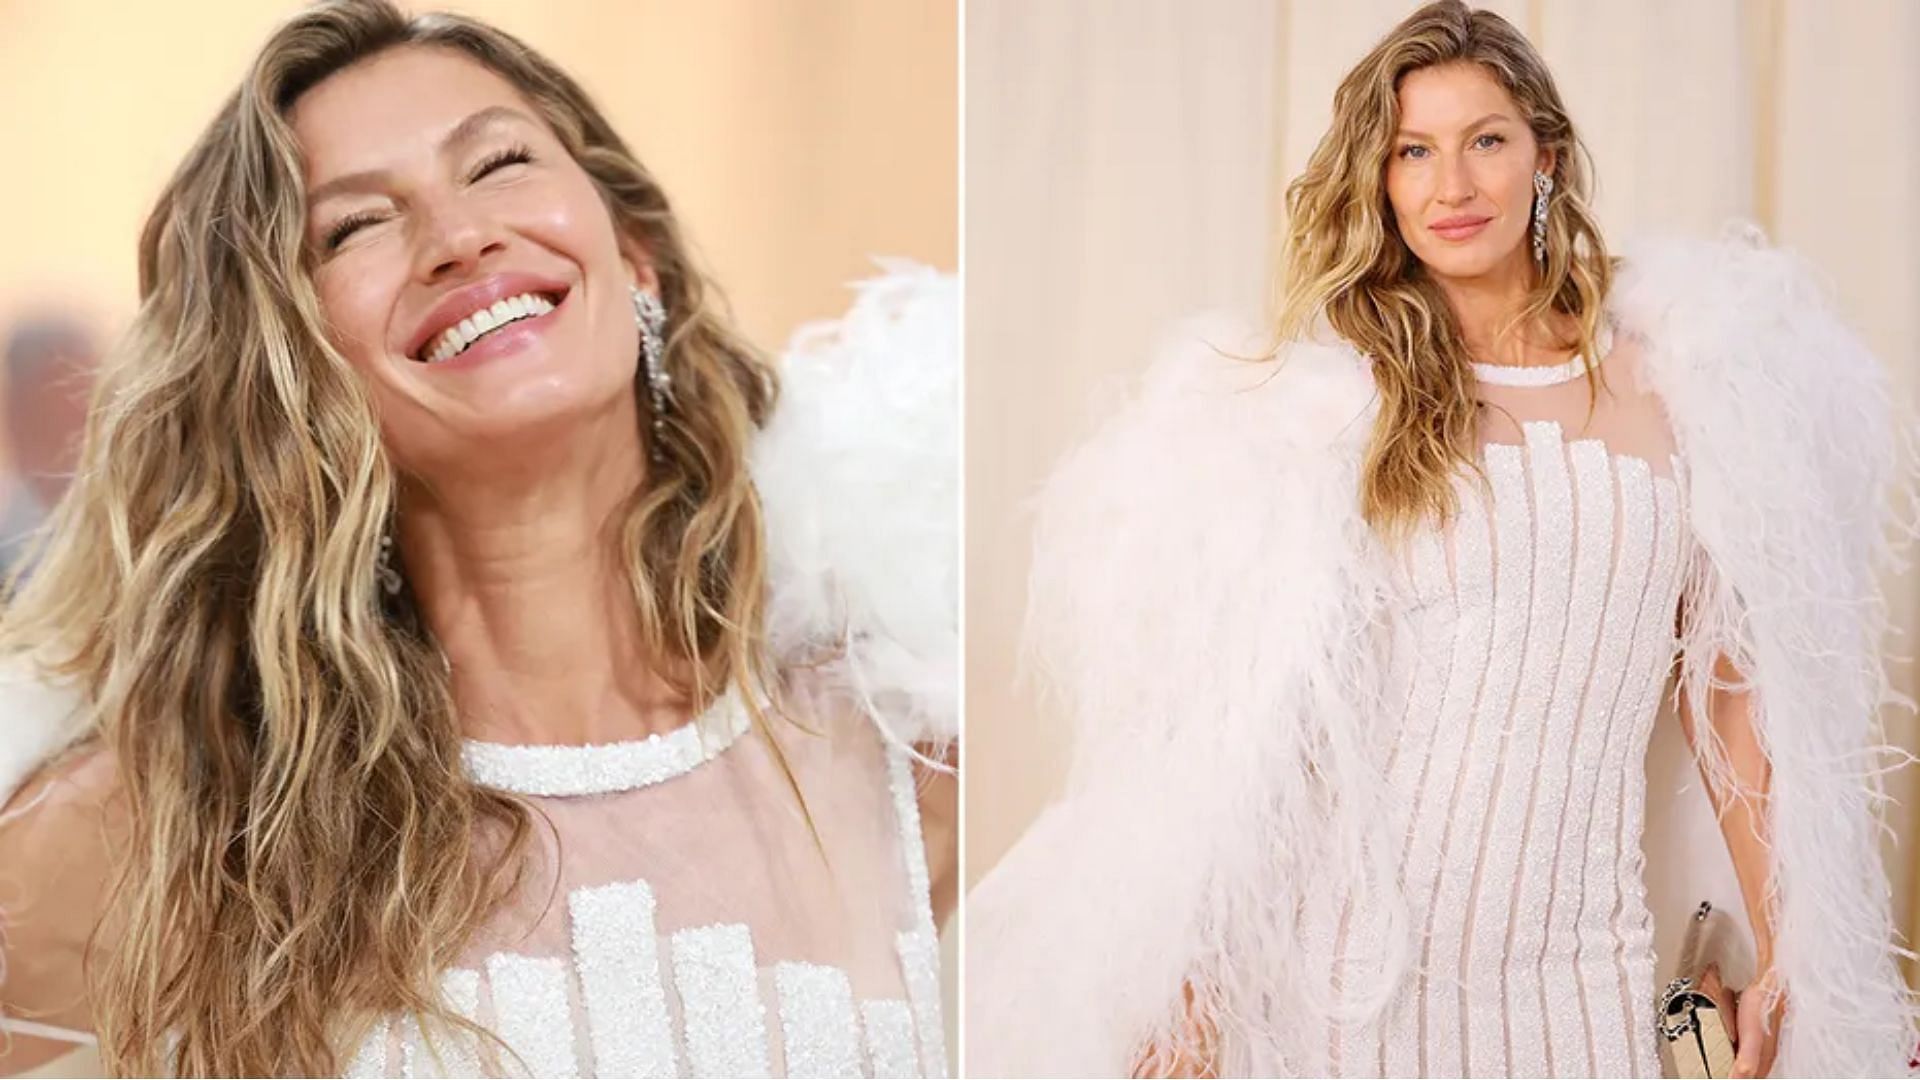 Gisele Bundchen dons stunning Chanel outfit in first Met Gala appearance post-Tom Brady breakup (Image credit: Getty Images)